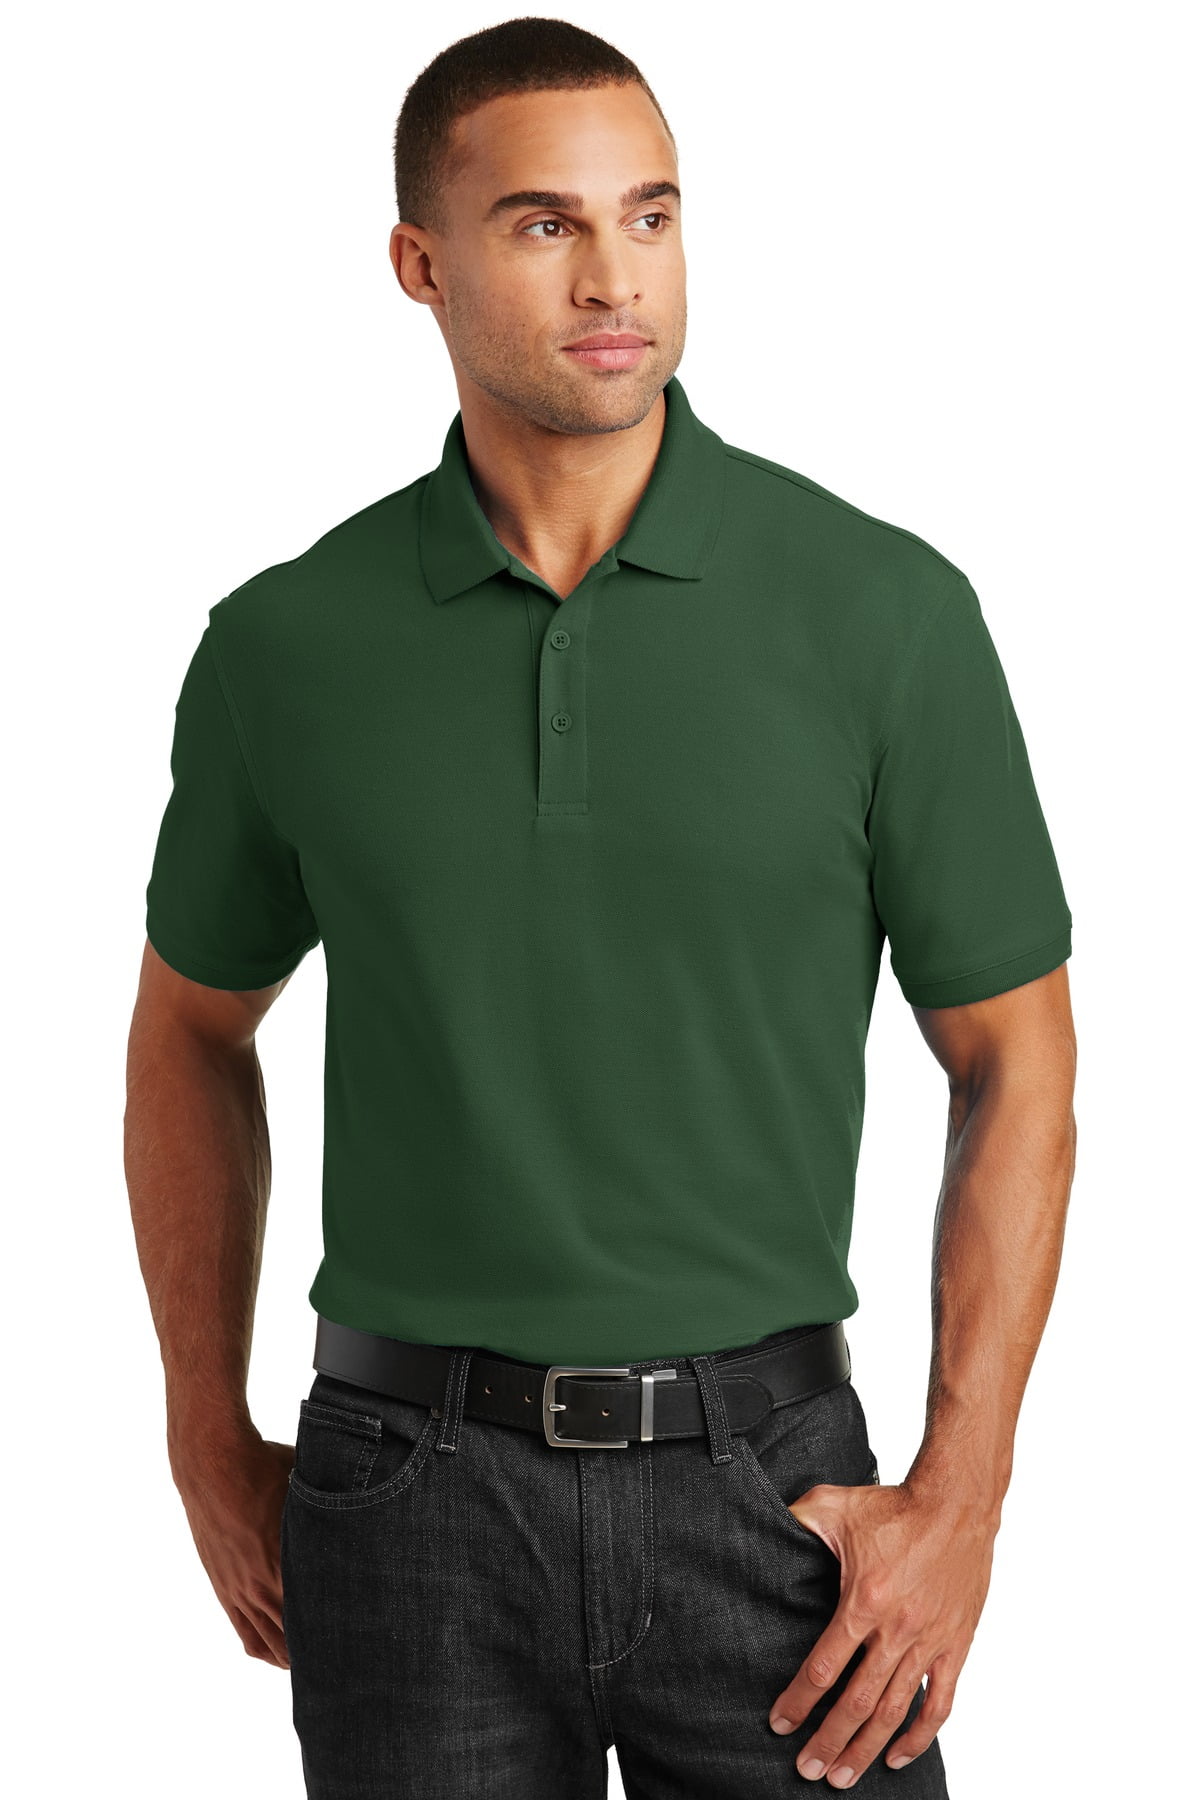 POCKET SIDE VENTS S-6XL MENS INDUSTRIAL WORK STAIN RESISTANT PIQUE POLO SHIRT 